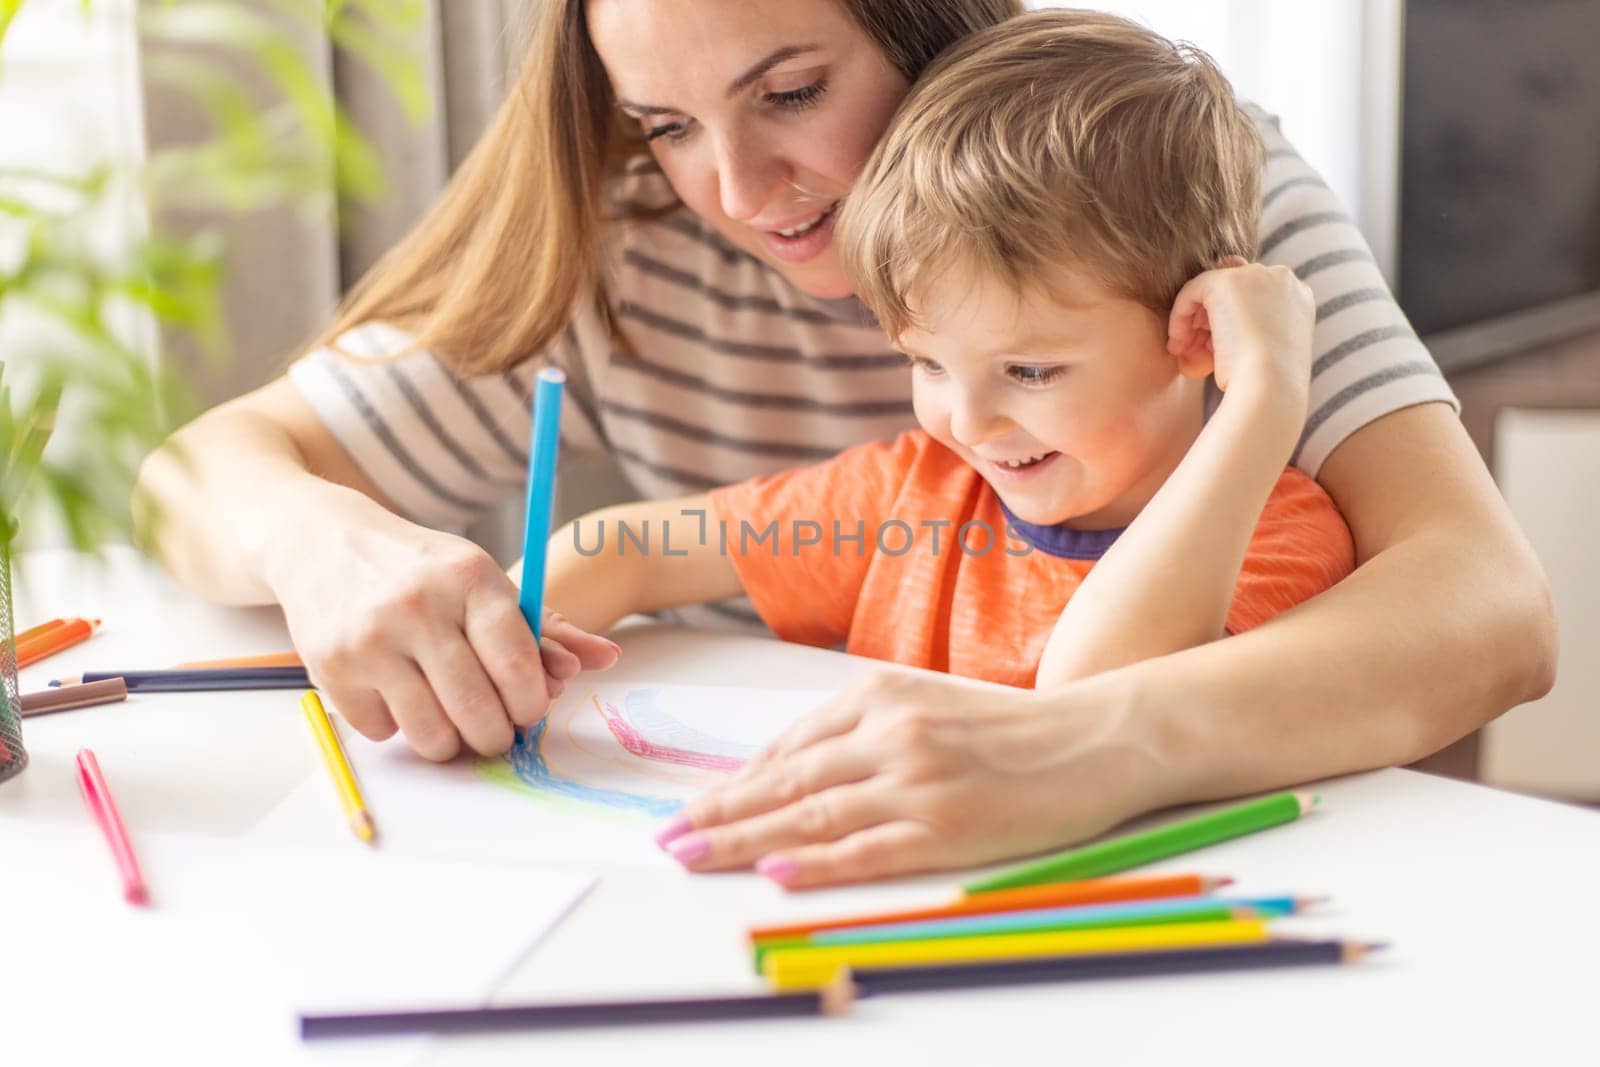 Mother and child drawing with pencils sitting at the desk at home. Happy family